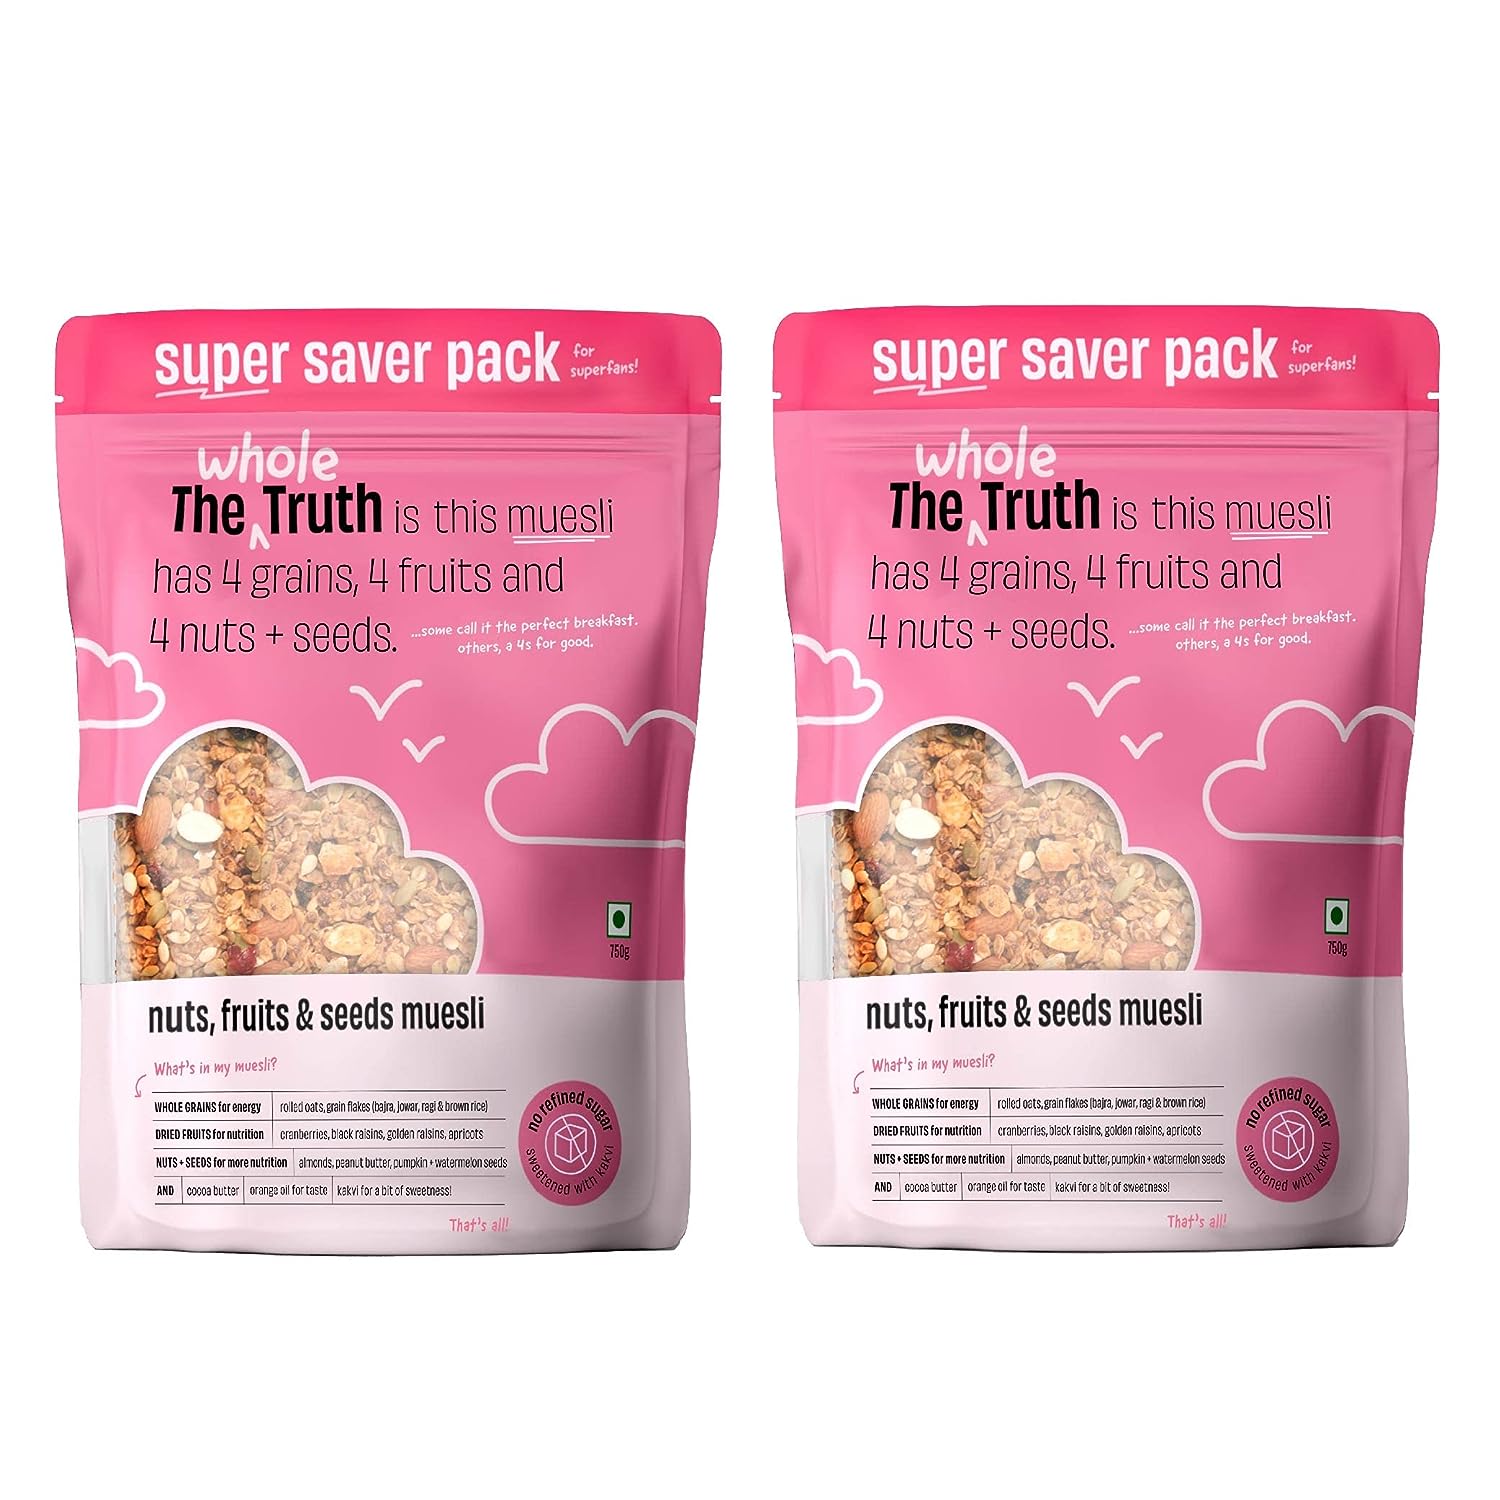 The Whole Truth - SUPERSAVER Breakfast Muesli Combo - Nuts, Fruits and Seeds - 750g - Pack of 2